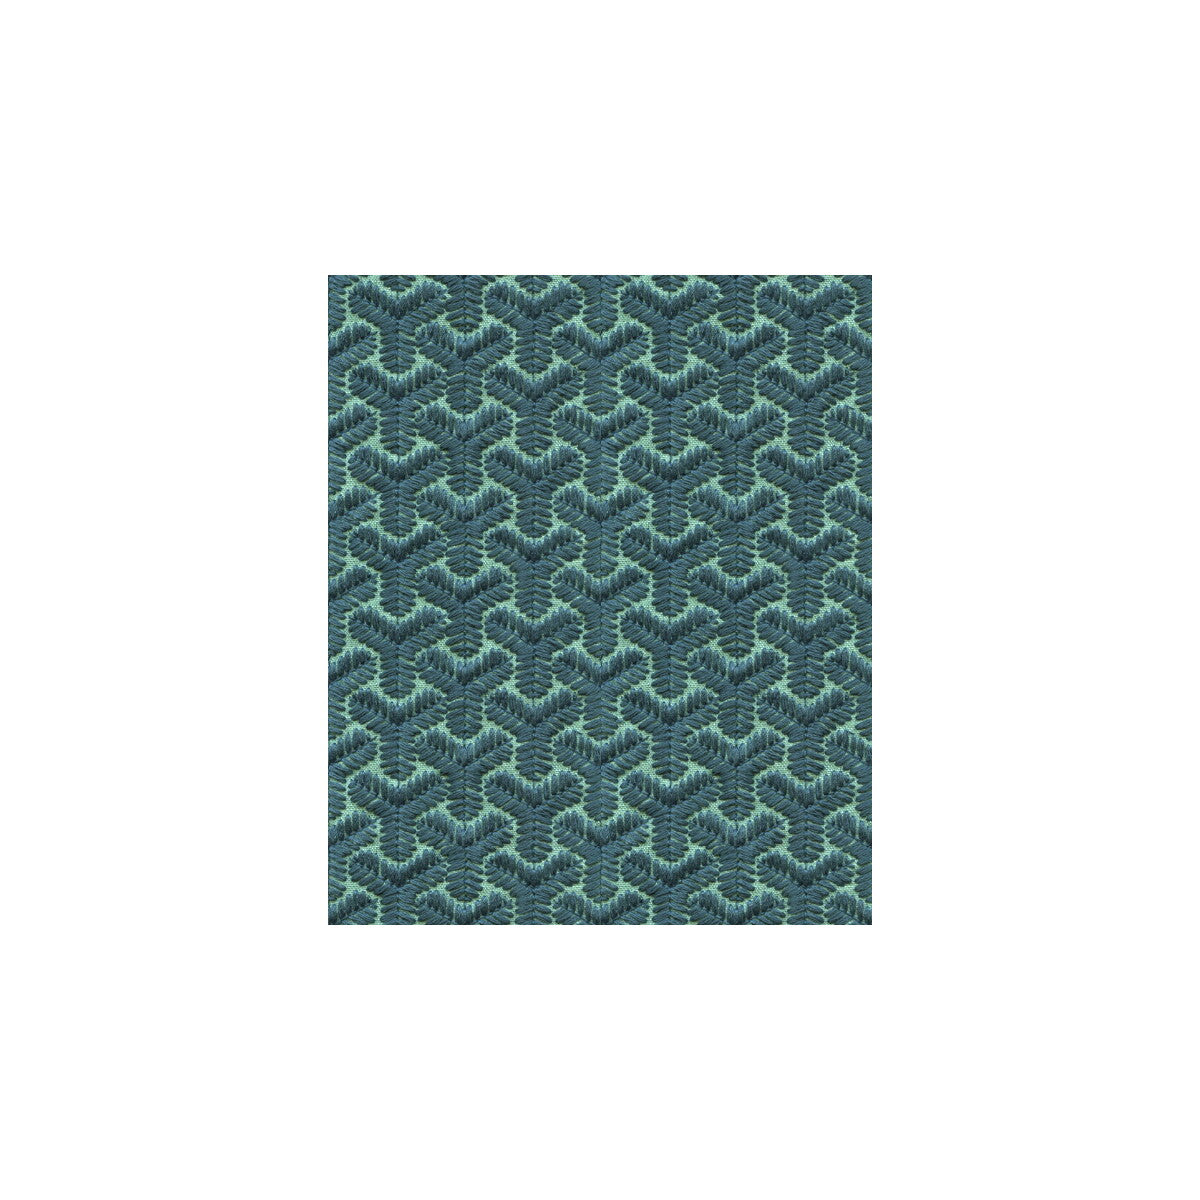 Chengtudoor Emb fabric in blue/aqua color - pattern GWF-3320.513.0 - by Lee Jofa Modern in the David Hicks 3 By Ashley Hicks collection